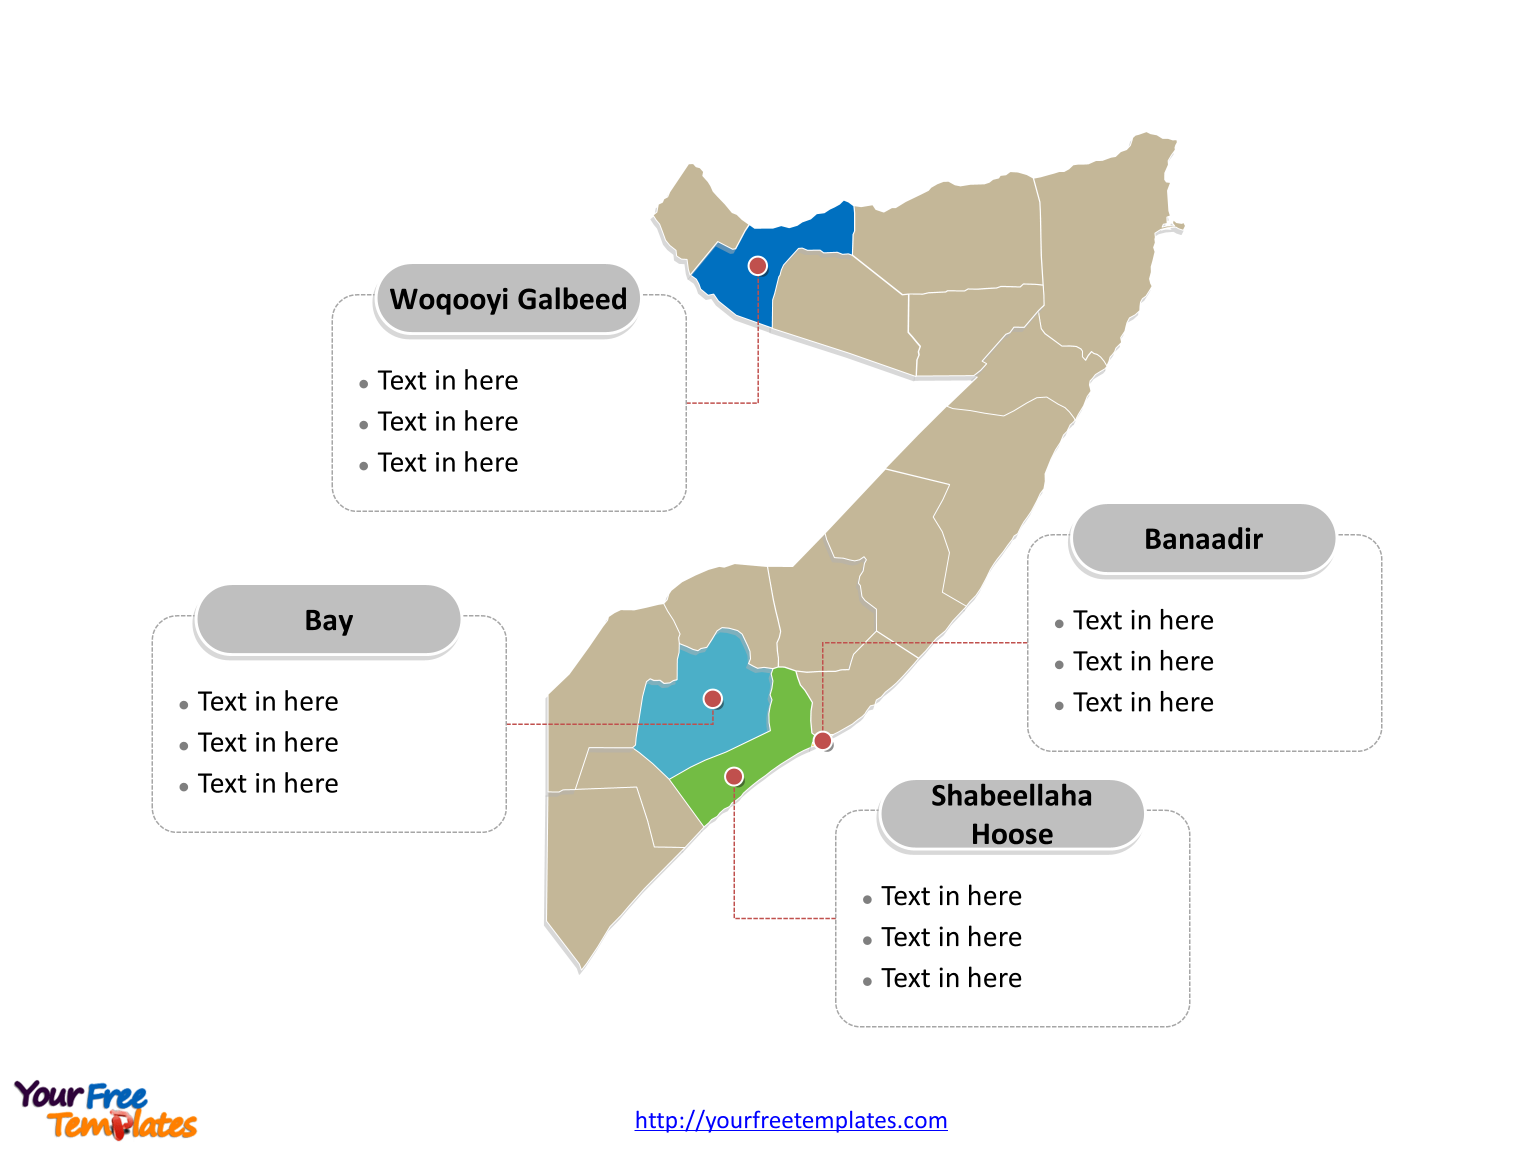 Somalia map labeled with major political Regions